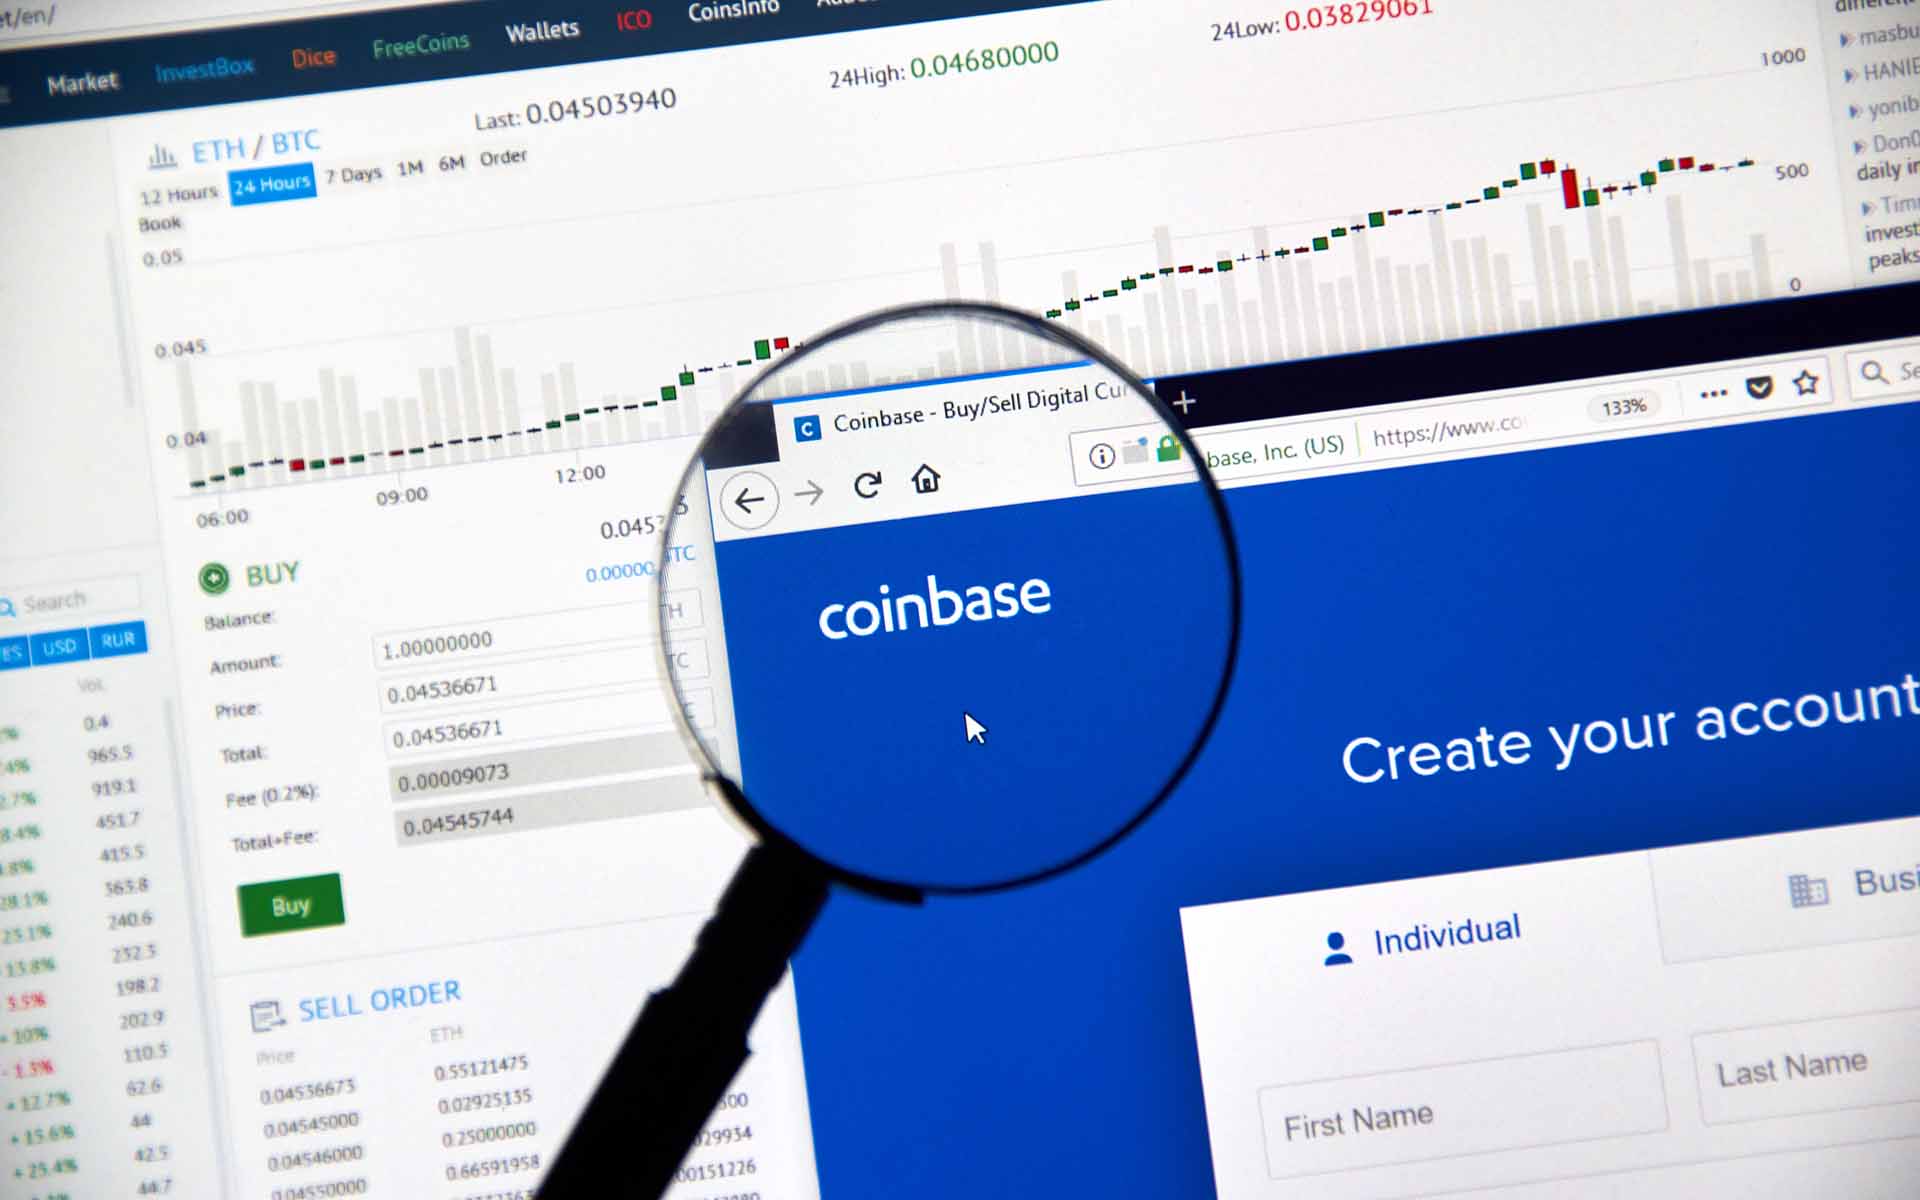 Coinbase Responds to Criticism: Set to Open New Portland Office with Focus on Customer Service